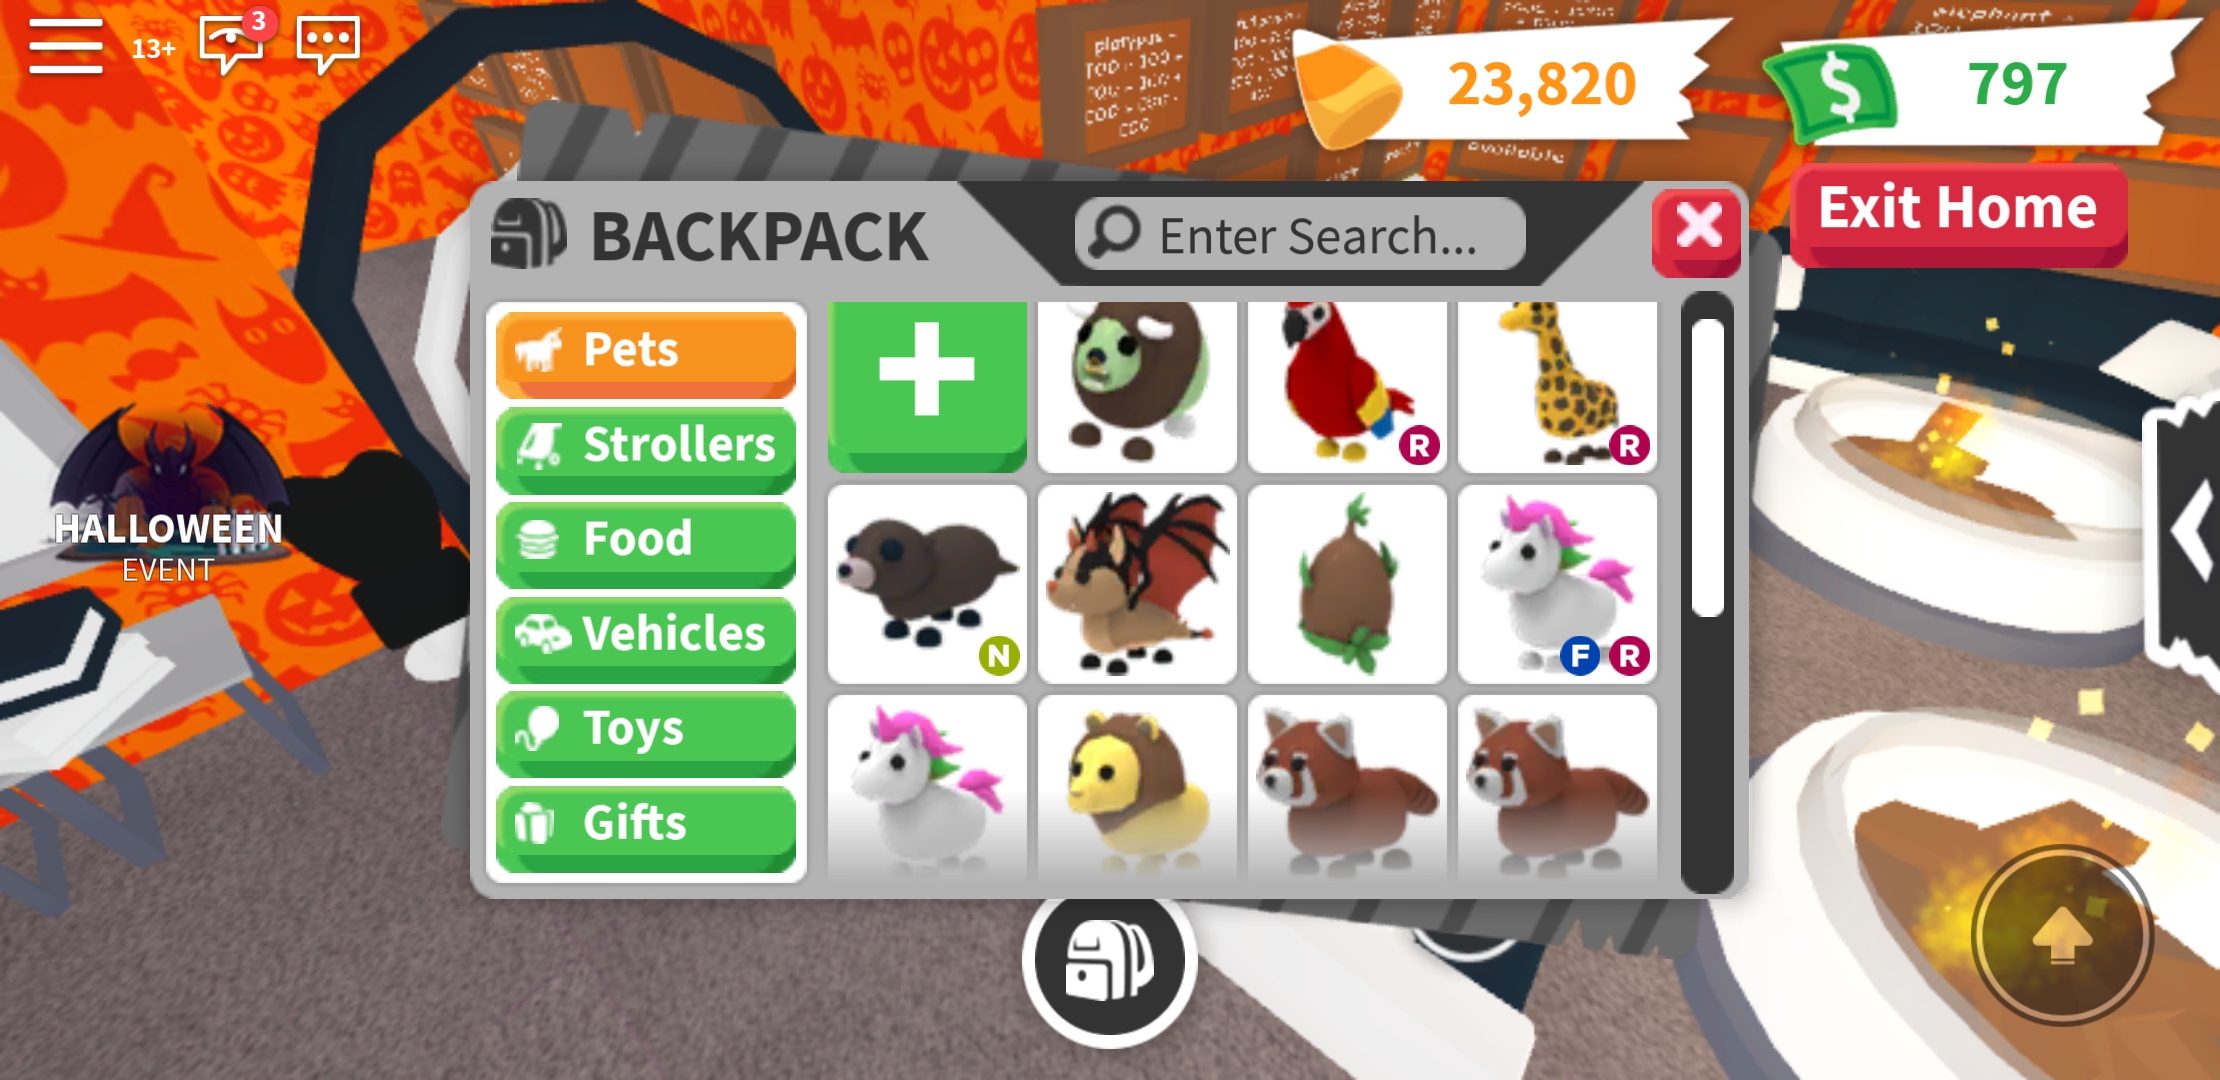 What Is The Most Valuable Item In Adopt Me - roblox adopt me rarest items